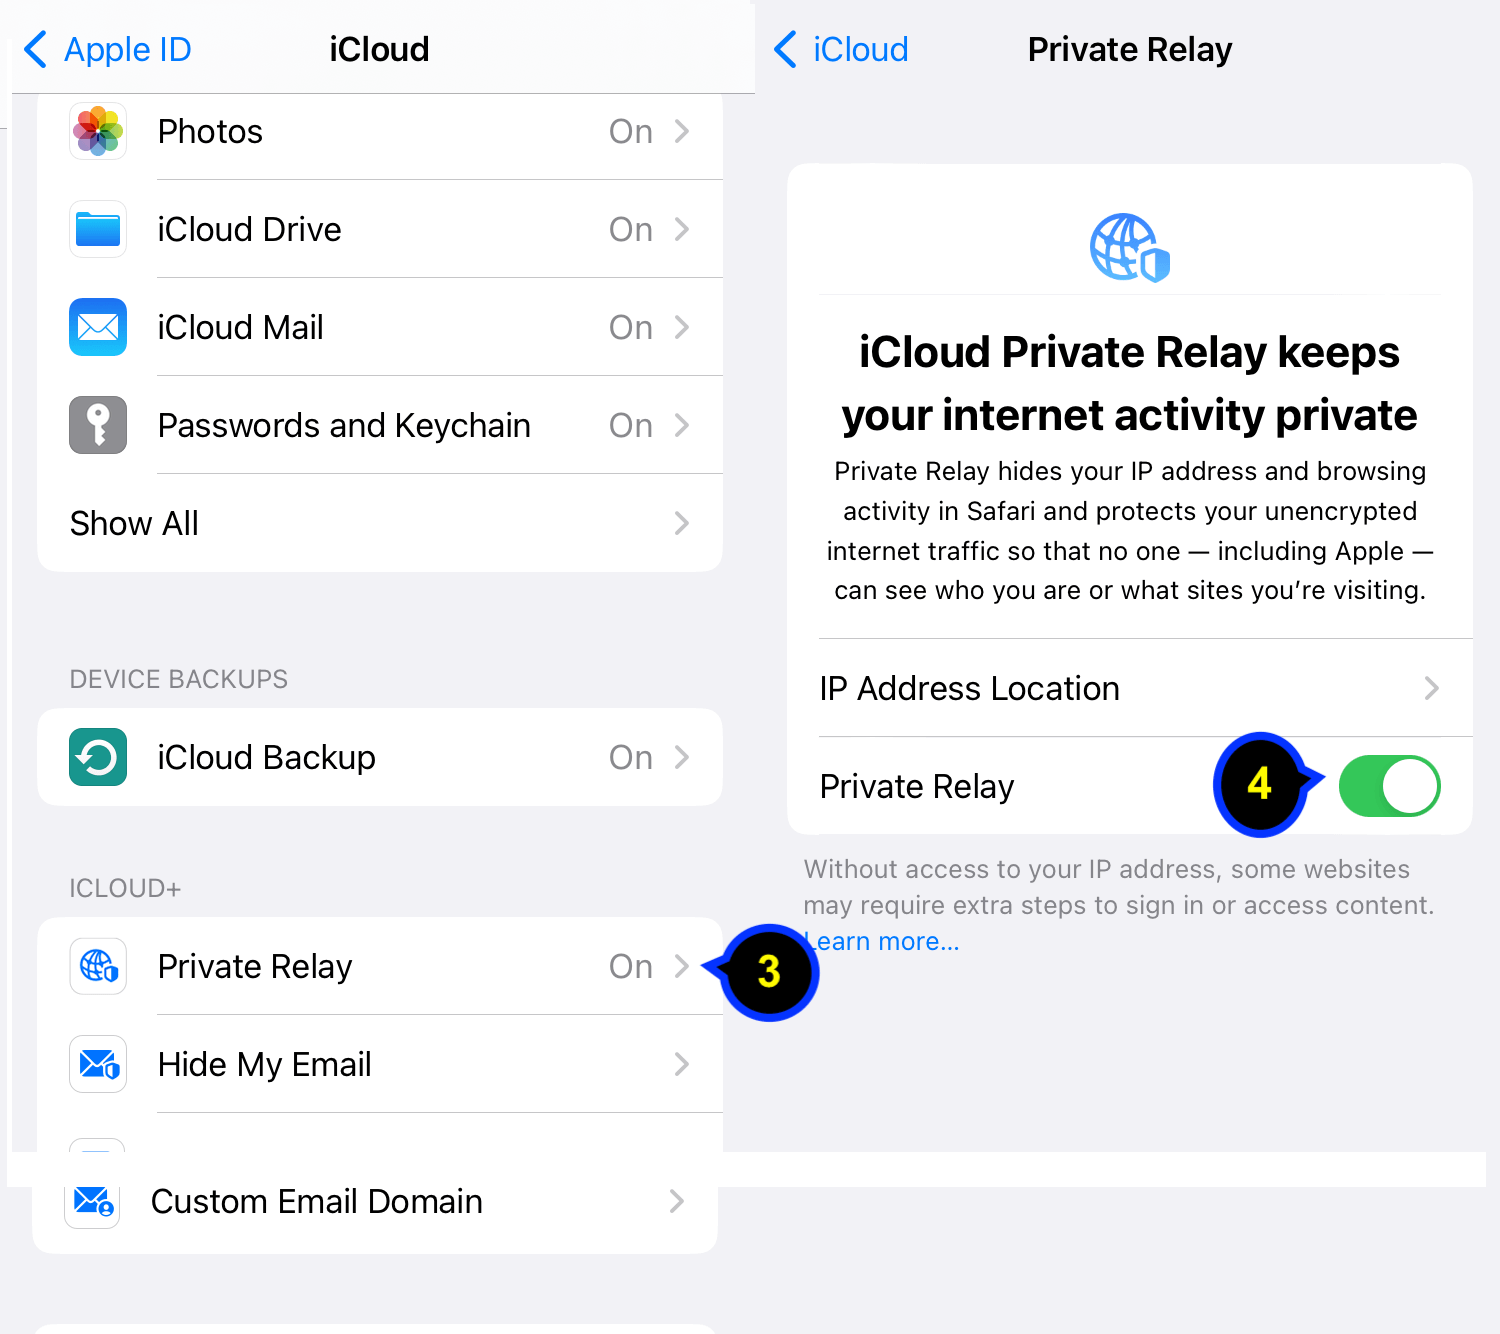 Turn on Private Relay on your iPhone or iPad